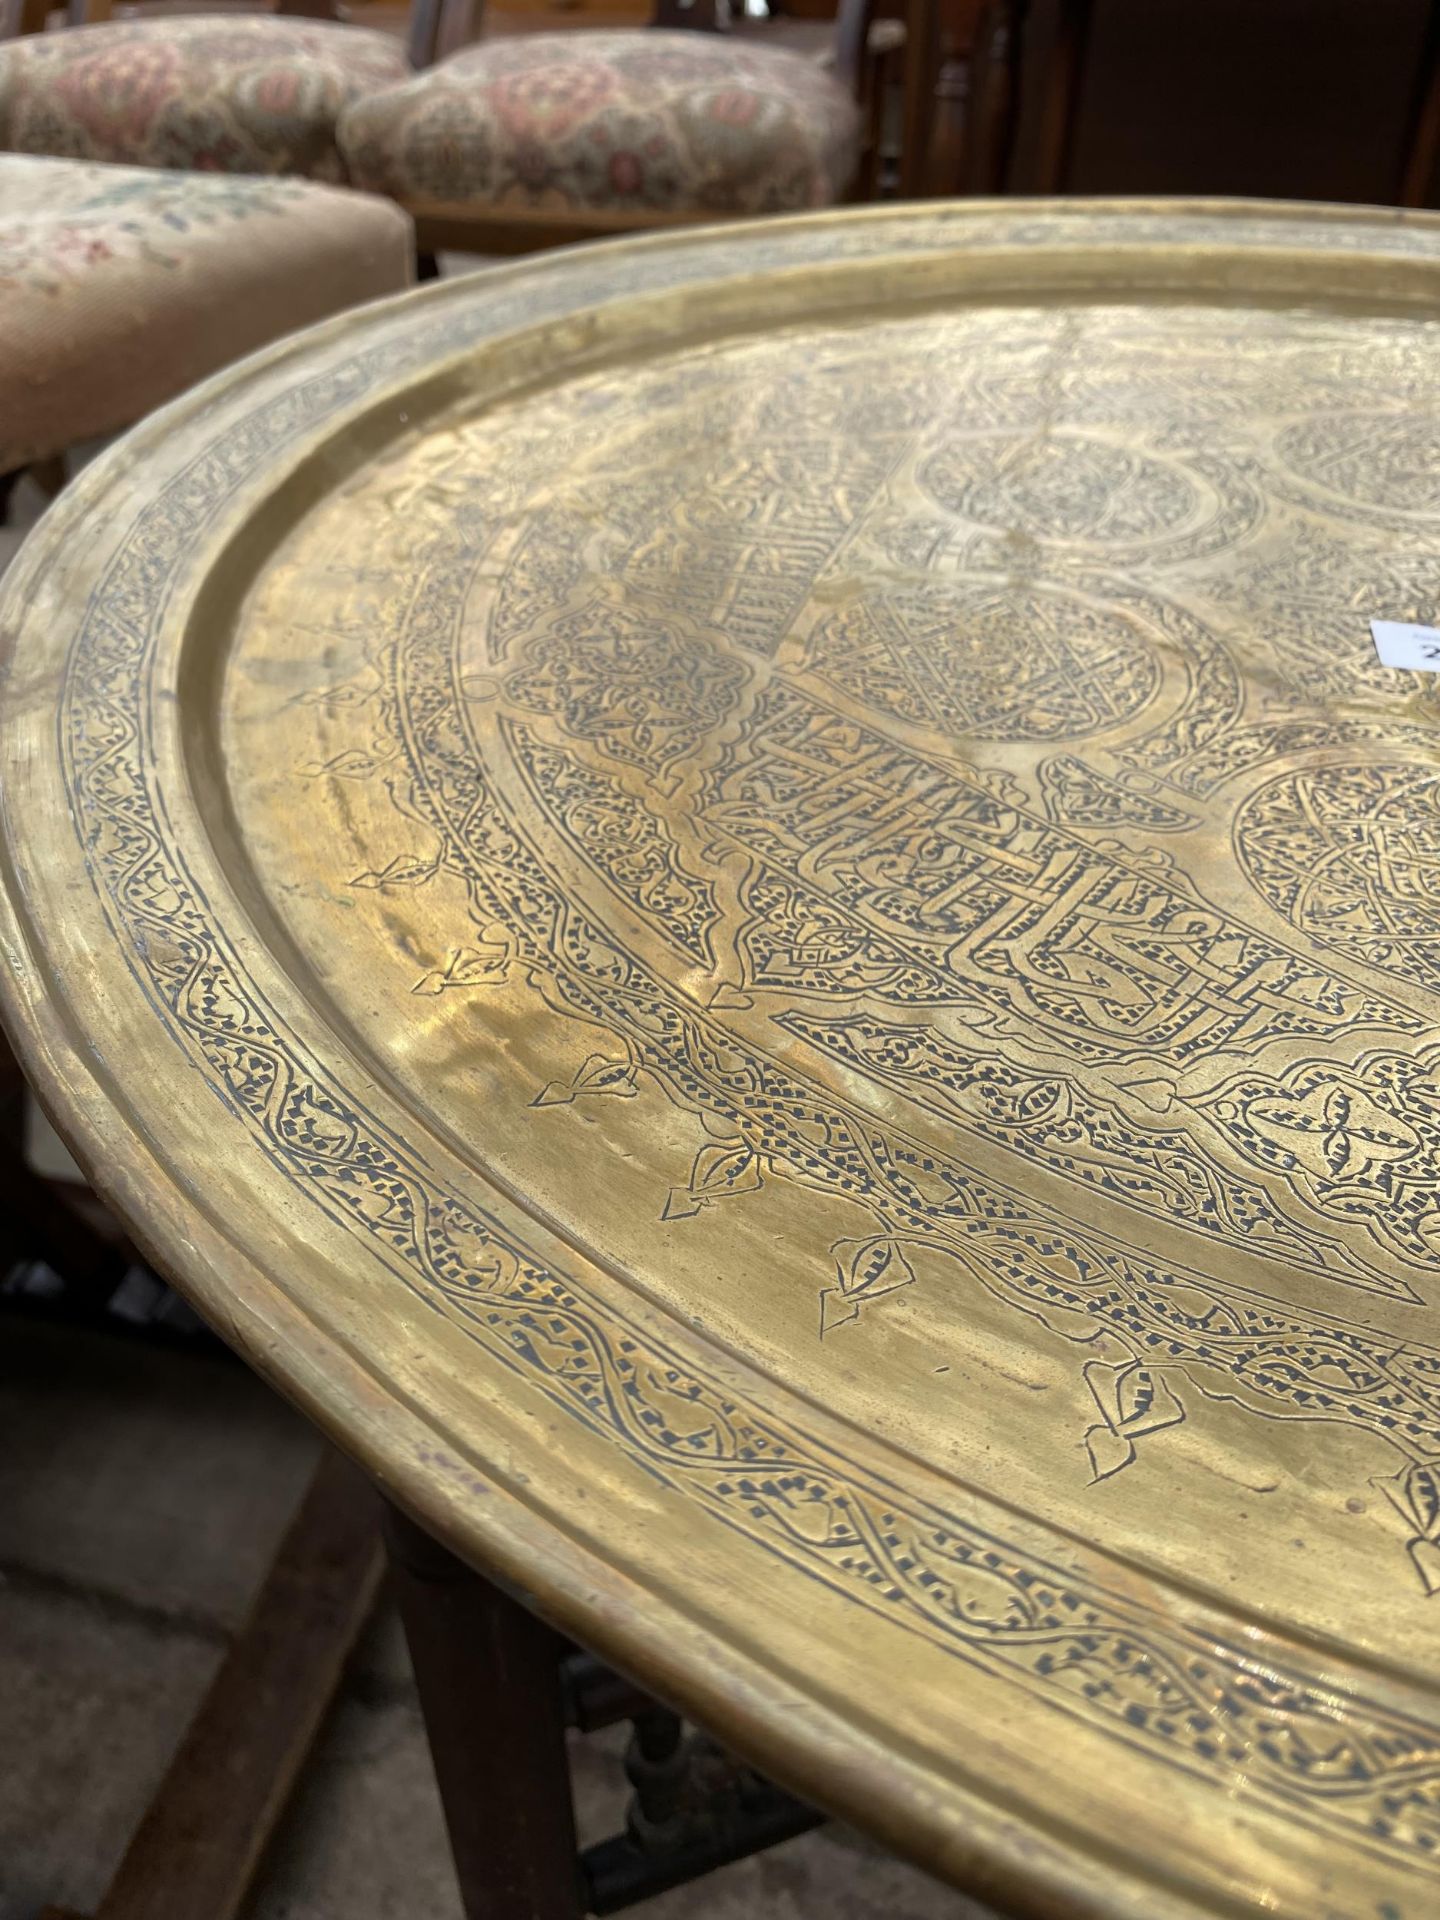 A MIDDLE EASTERN BRASS TABLE, 23.5" DIAMETER, ON FOLDING BASE - Image 3 of 3